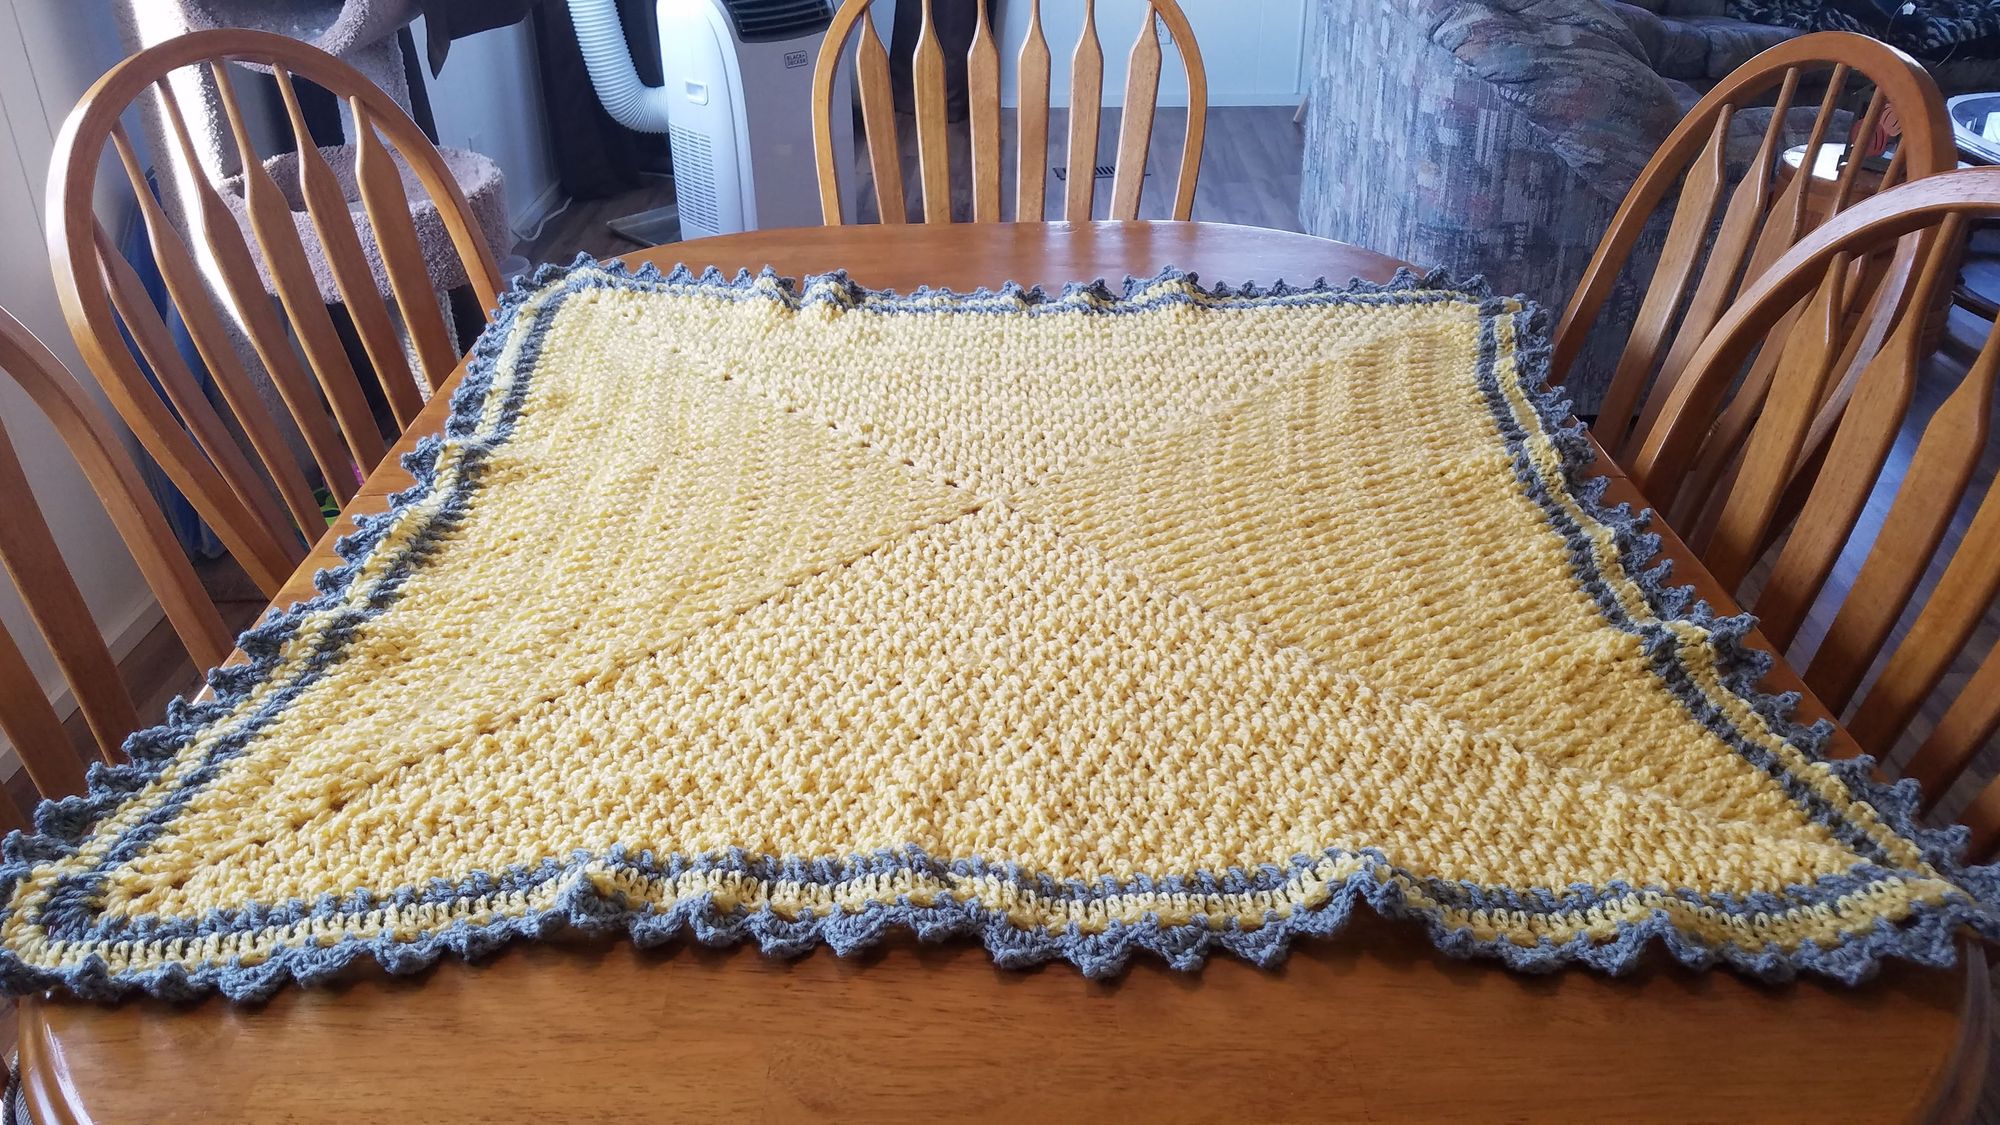 The Love and Sunshine Blanket Is Finished!!!